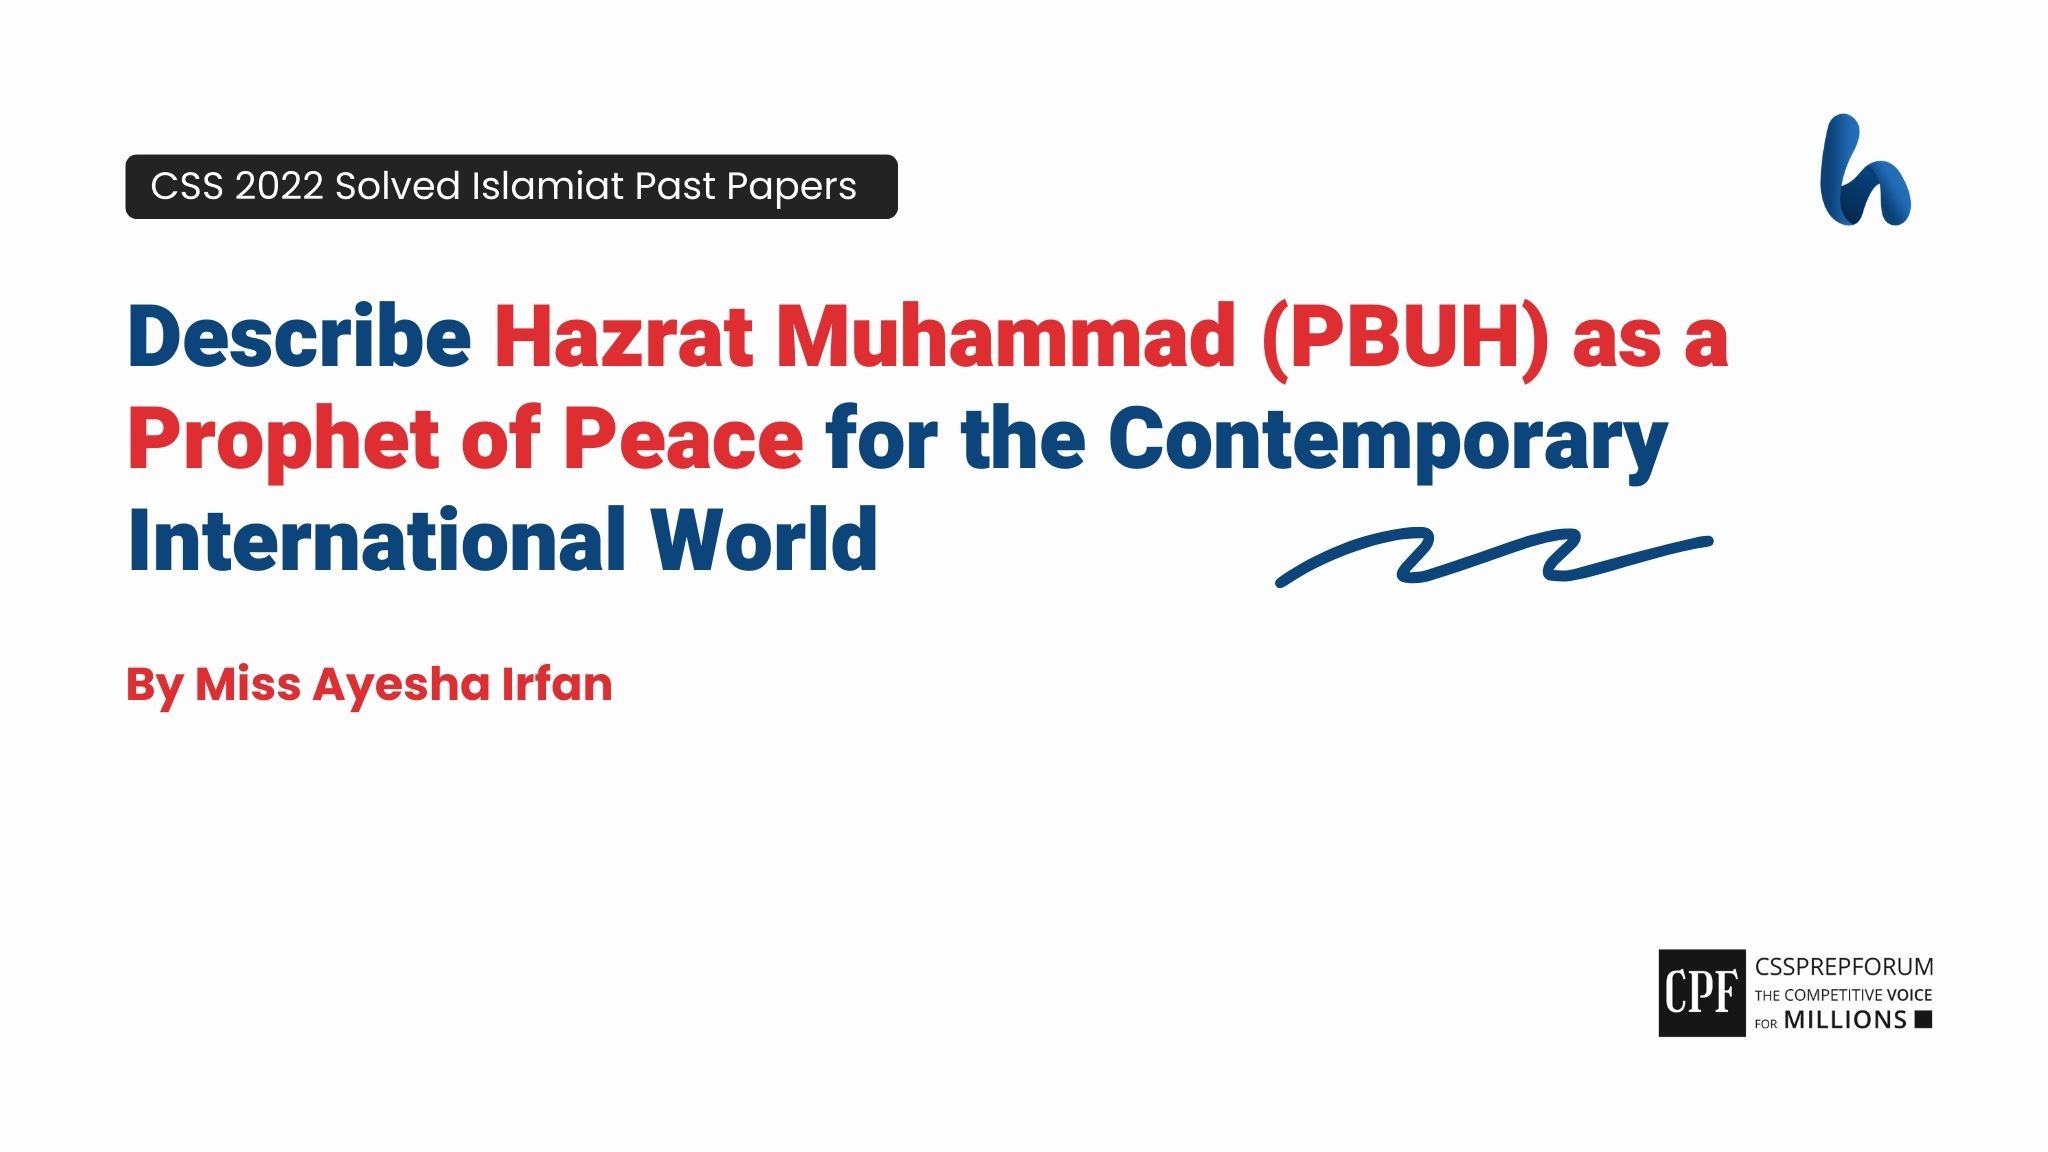 Describe Hazrat Muhammad (PBUH) as a Prophet of Peace for the Contemporary International World